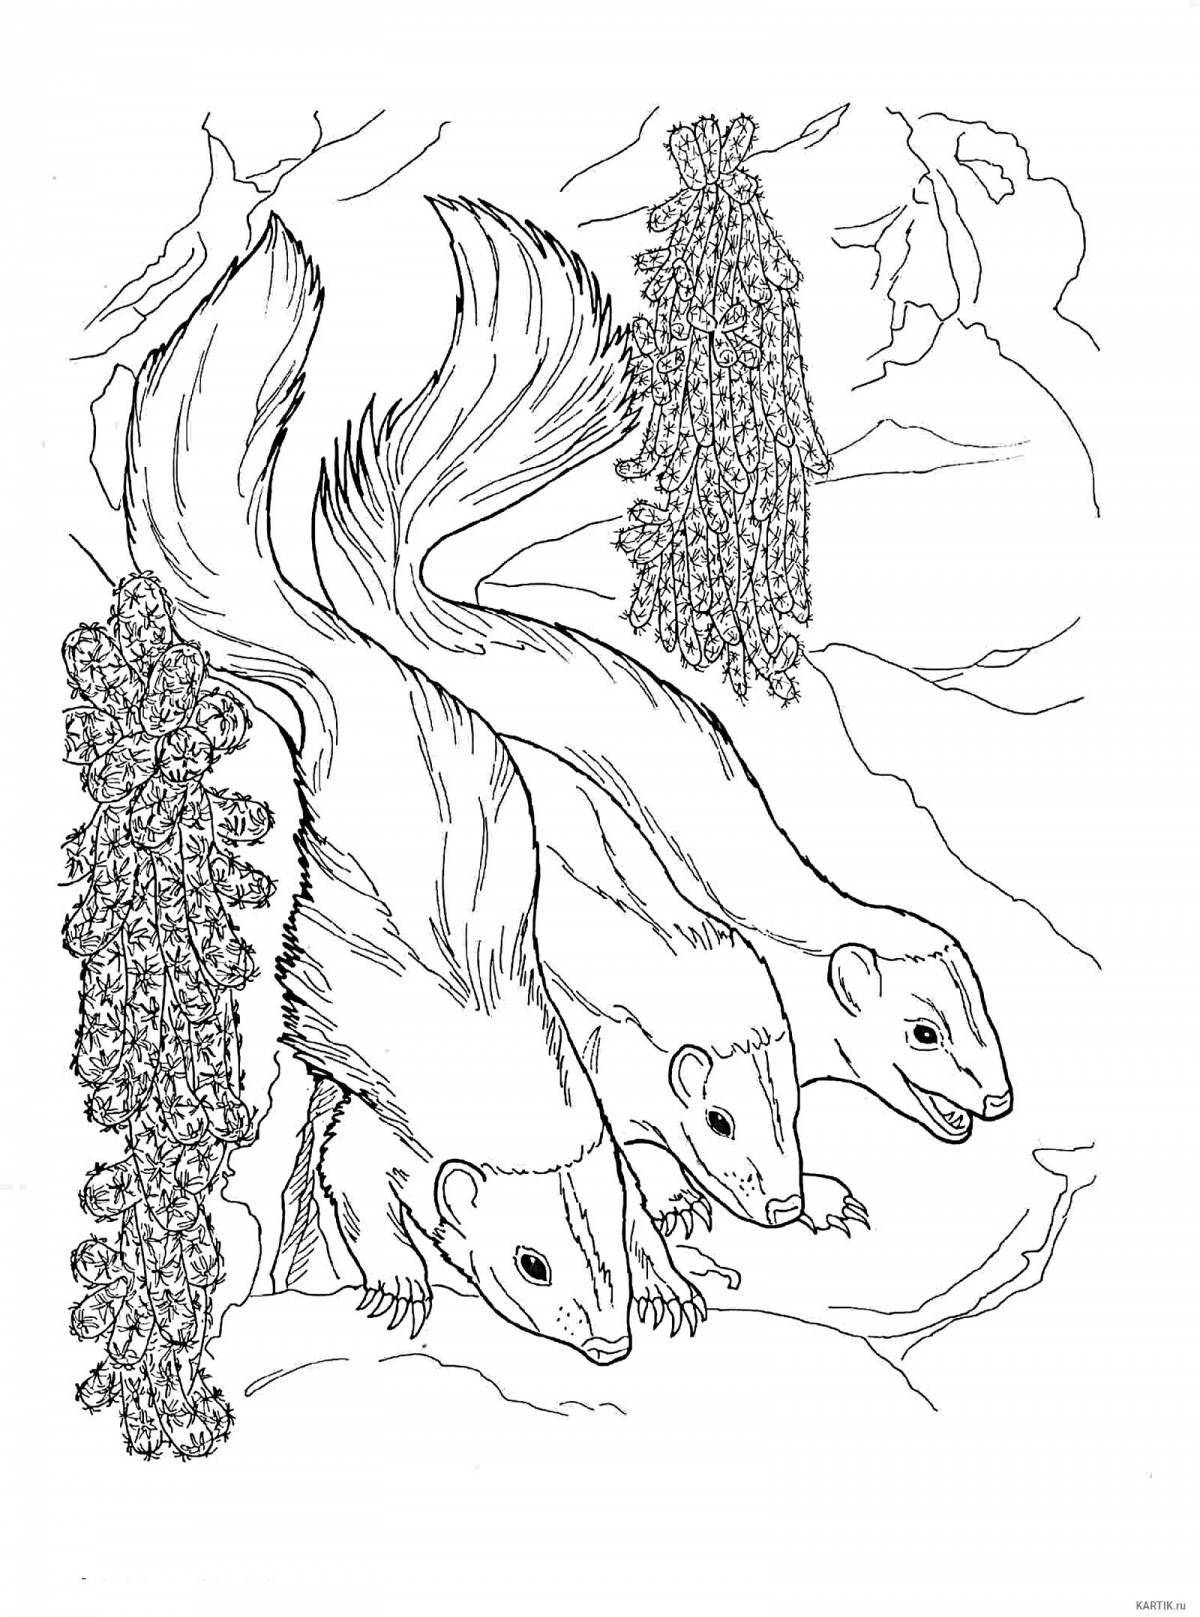 Playful weasel coloring for children